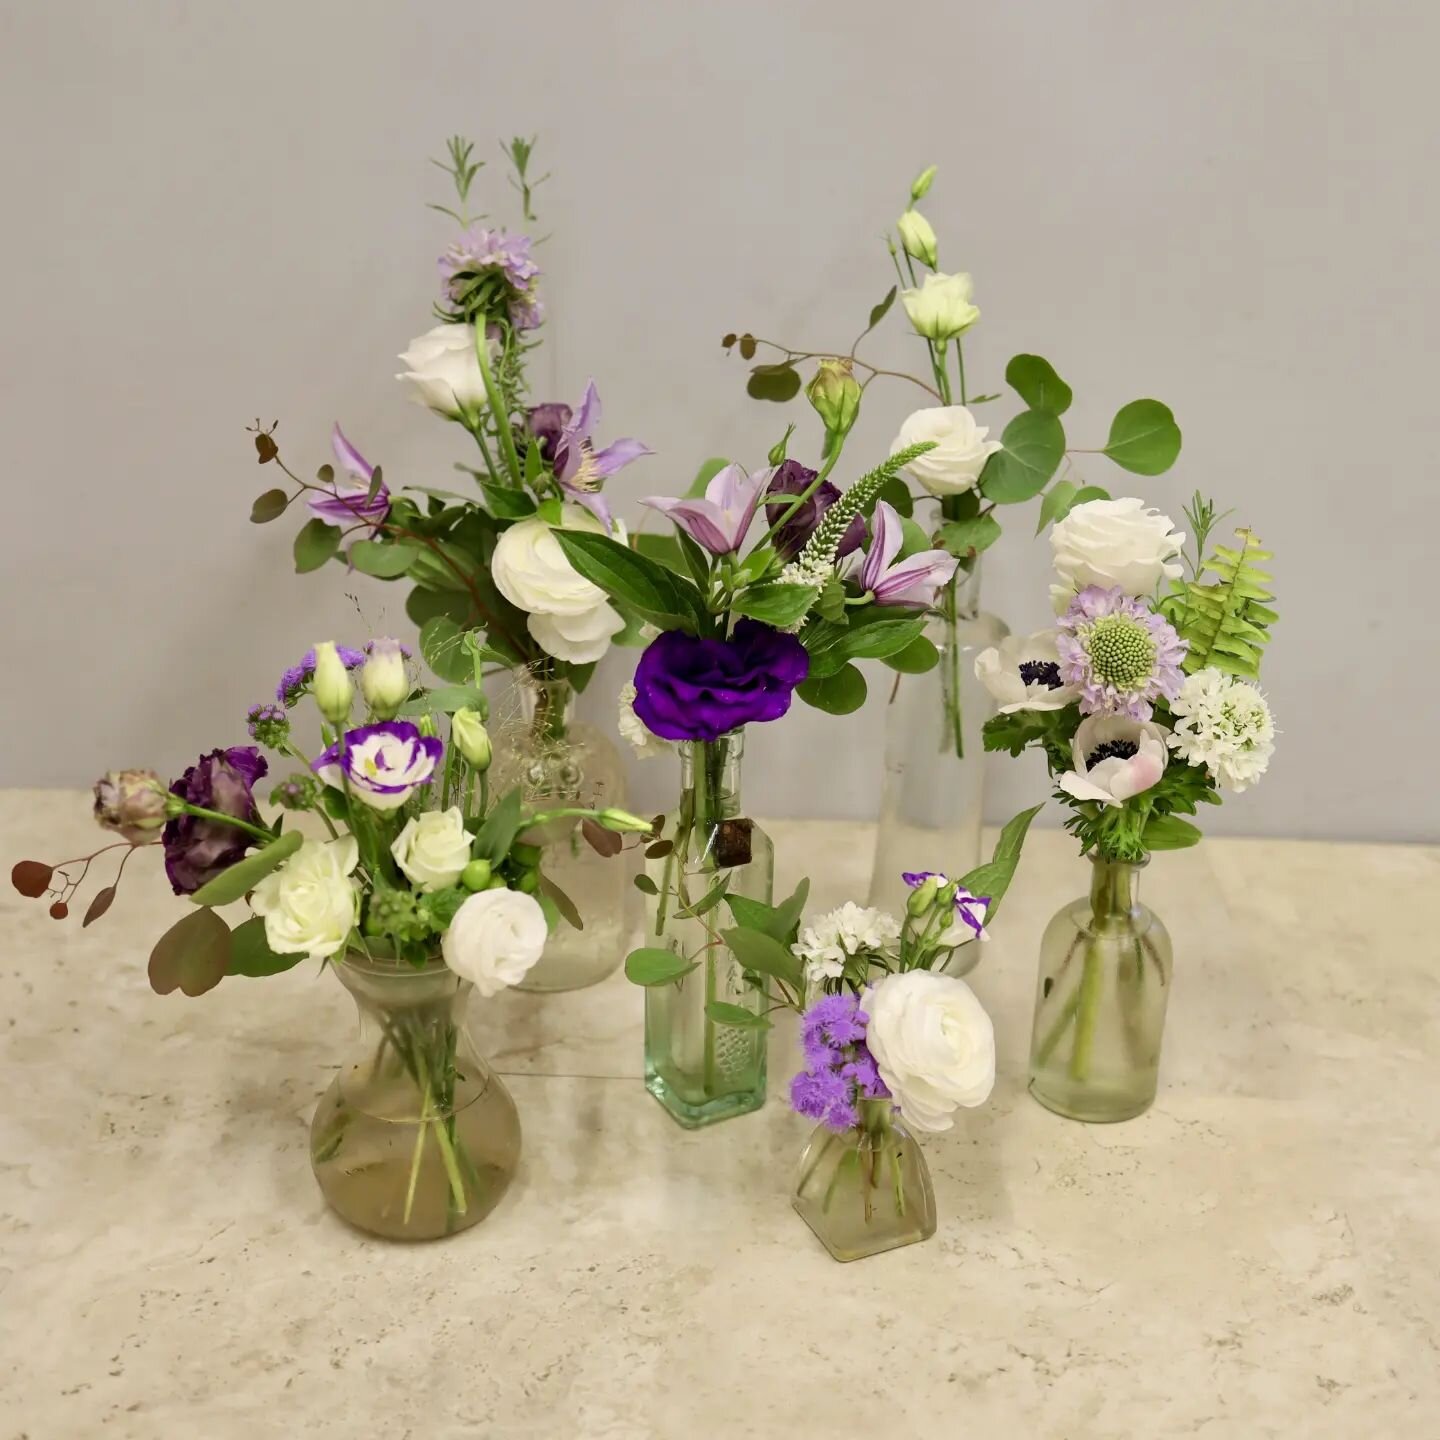 Here's a fresh mockup we designed in a collection of apothecary bottles

#purpleflowers #apothecarybottles #flowercollection #floraldecor #eventdesign #mockup #longstemsevents #ranunculus #lisianthus #anemone #scabiosa